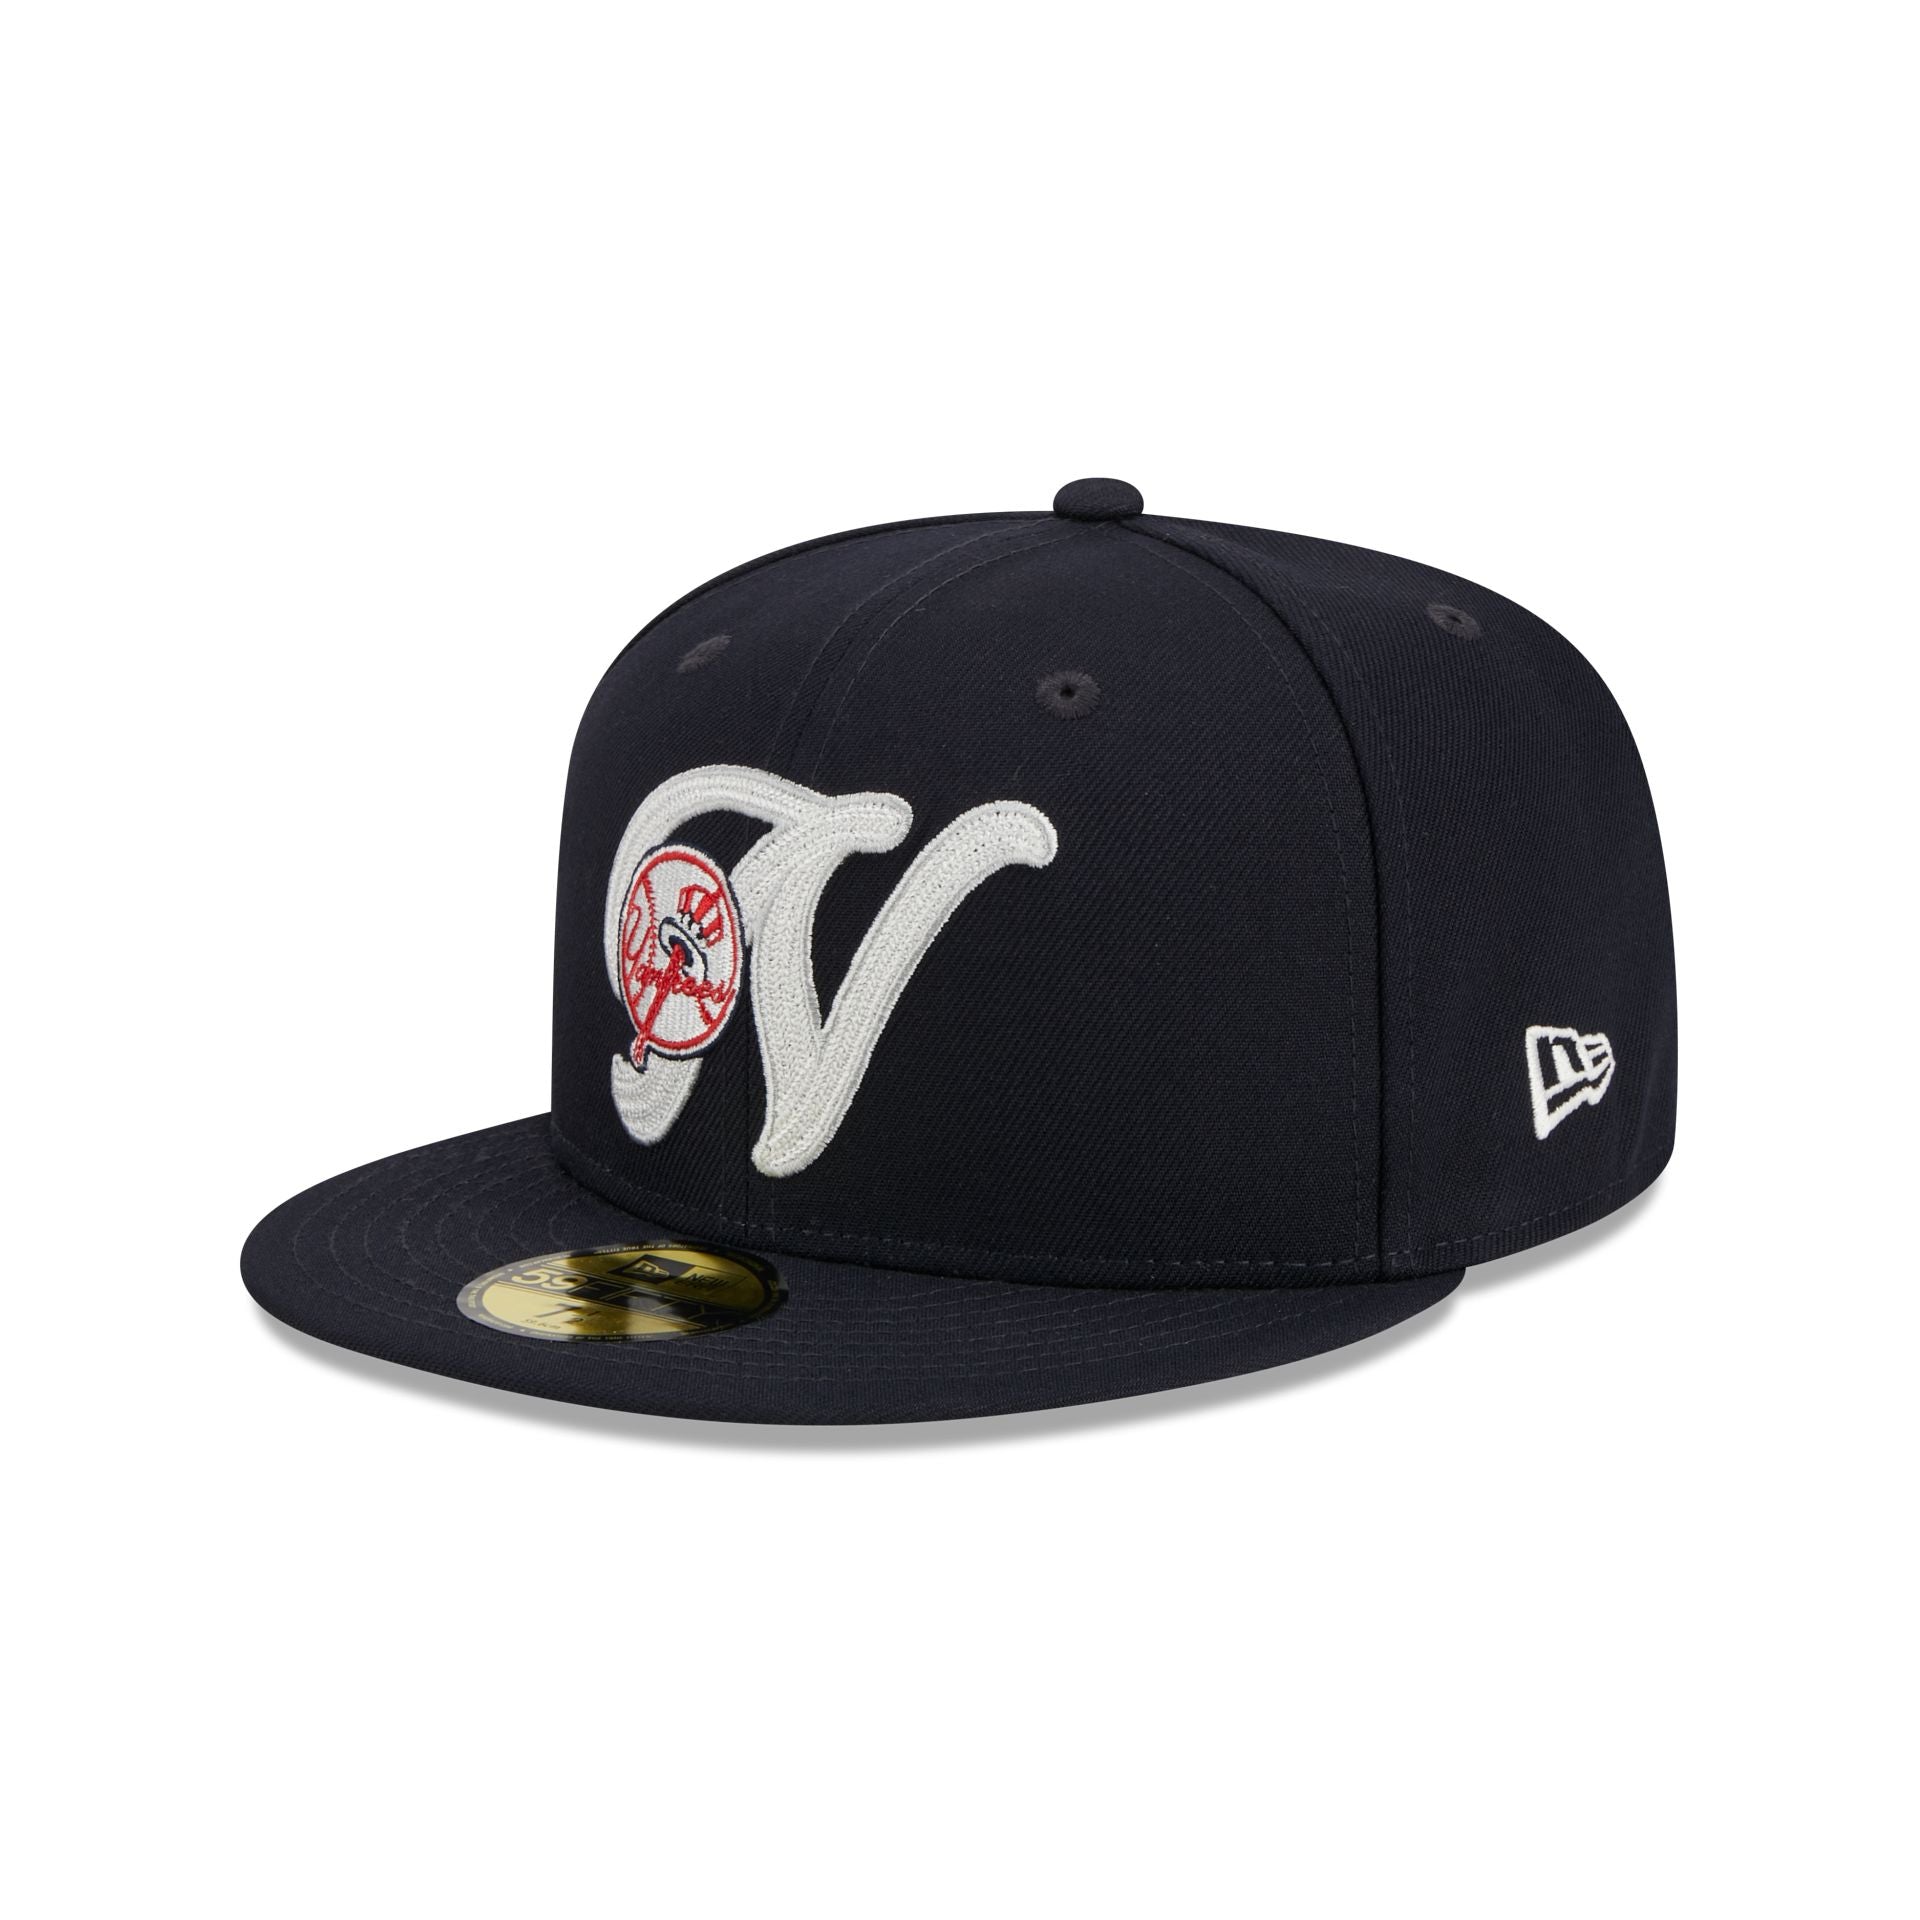 New Era Men's MLB AC 59FIFTY New York Yankees Home Fitted Cap